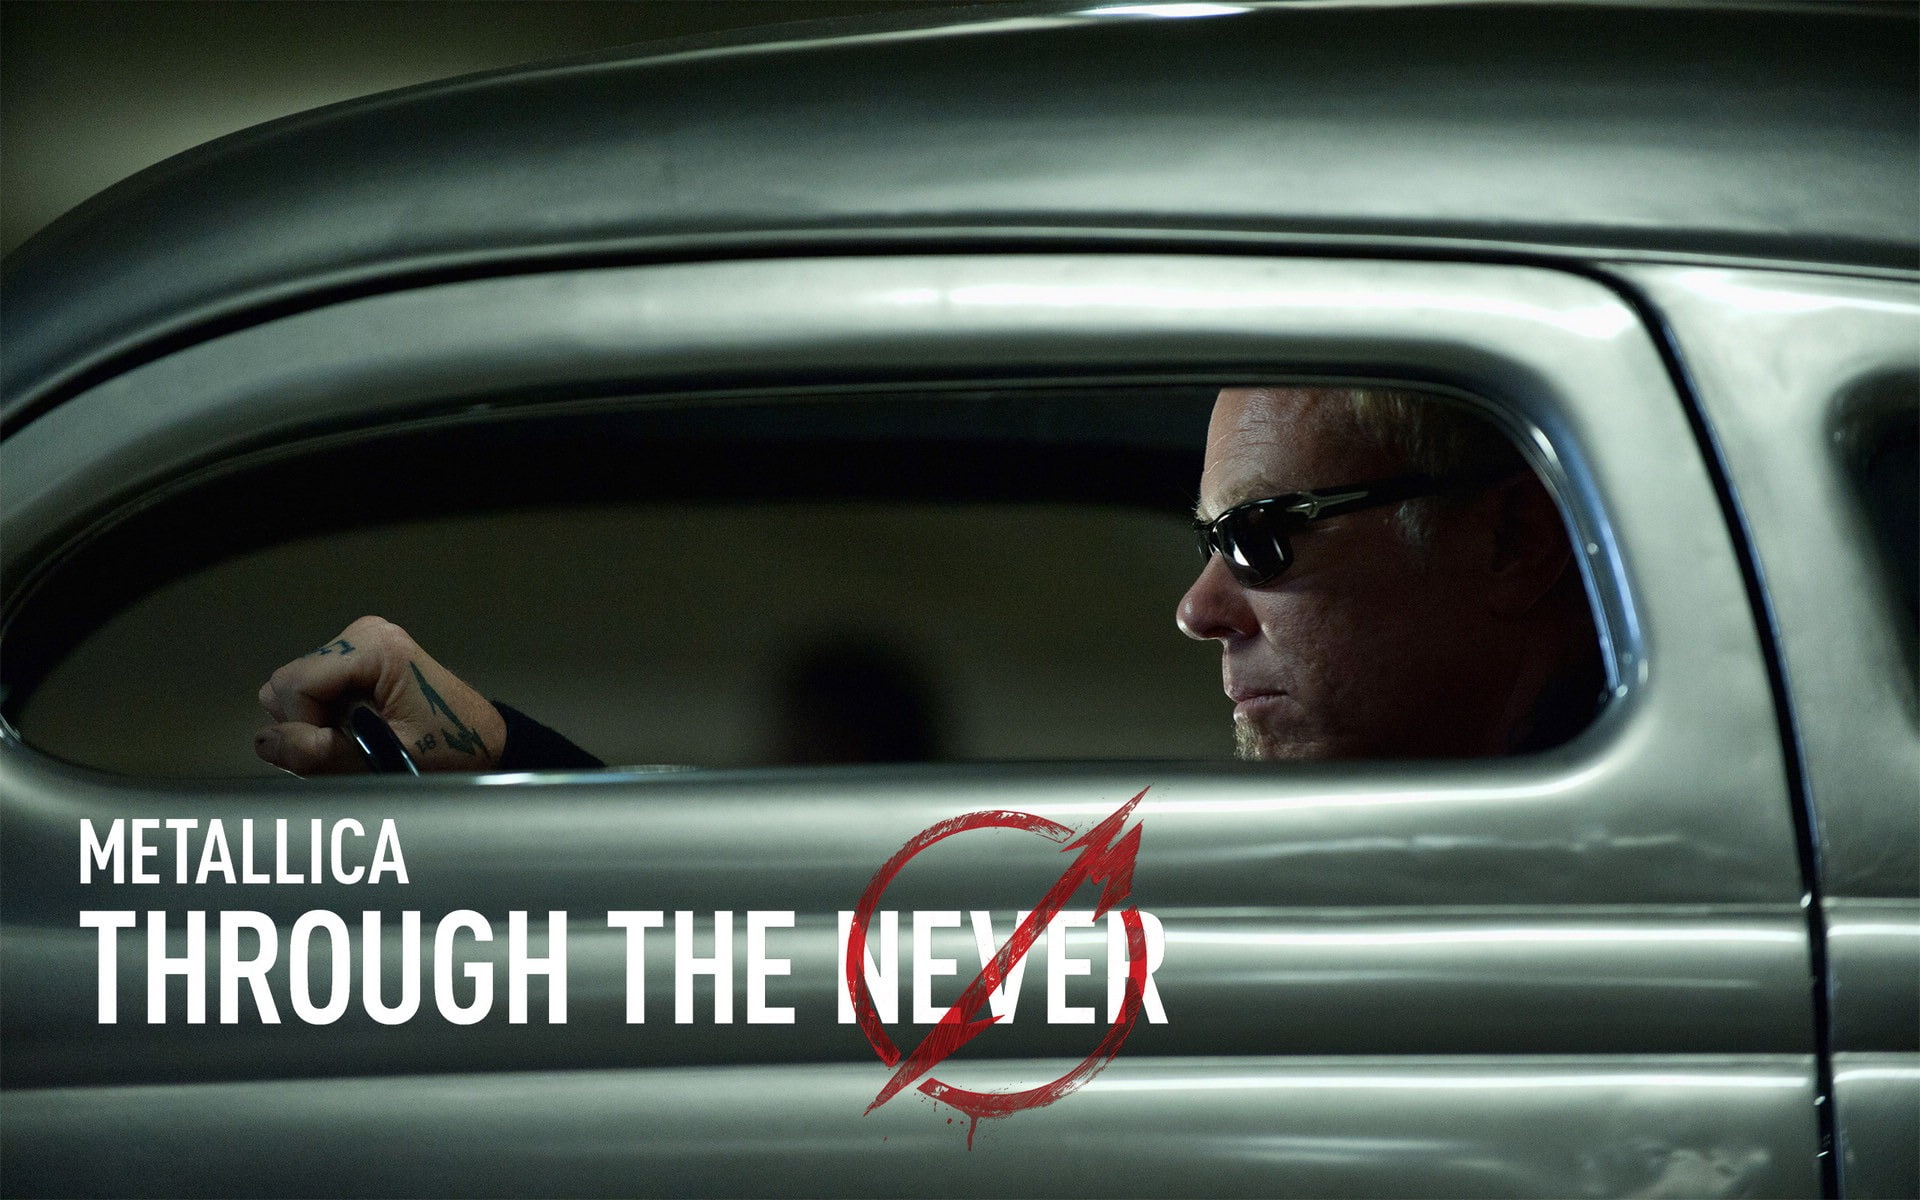 Metallica Through the Never Movie HD Wallpaper 01, men's black sunglasses with text overlay